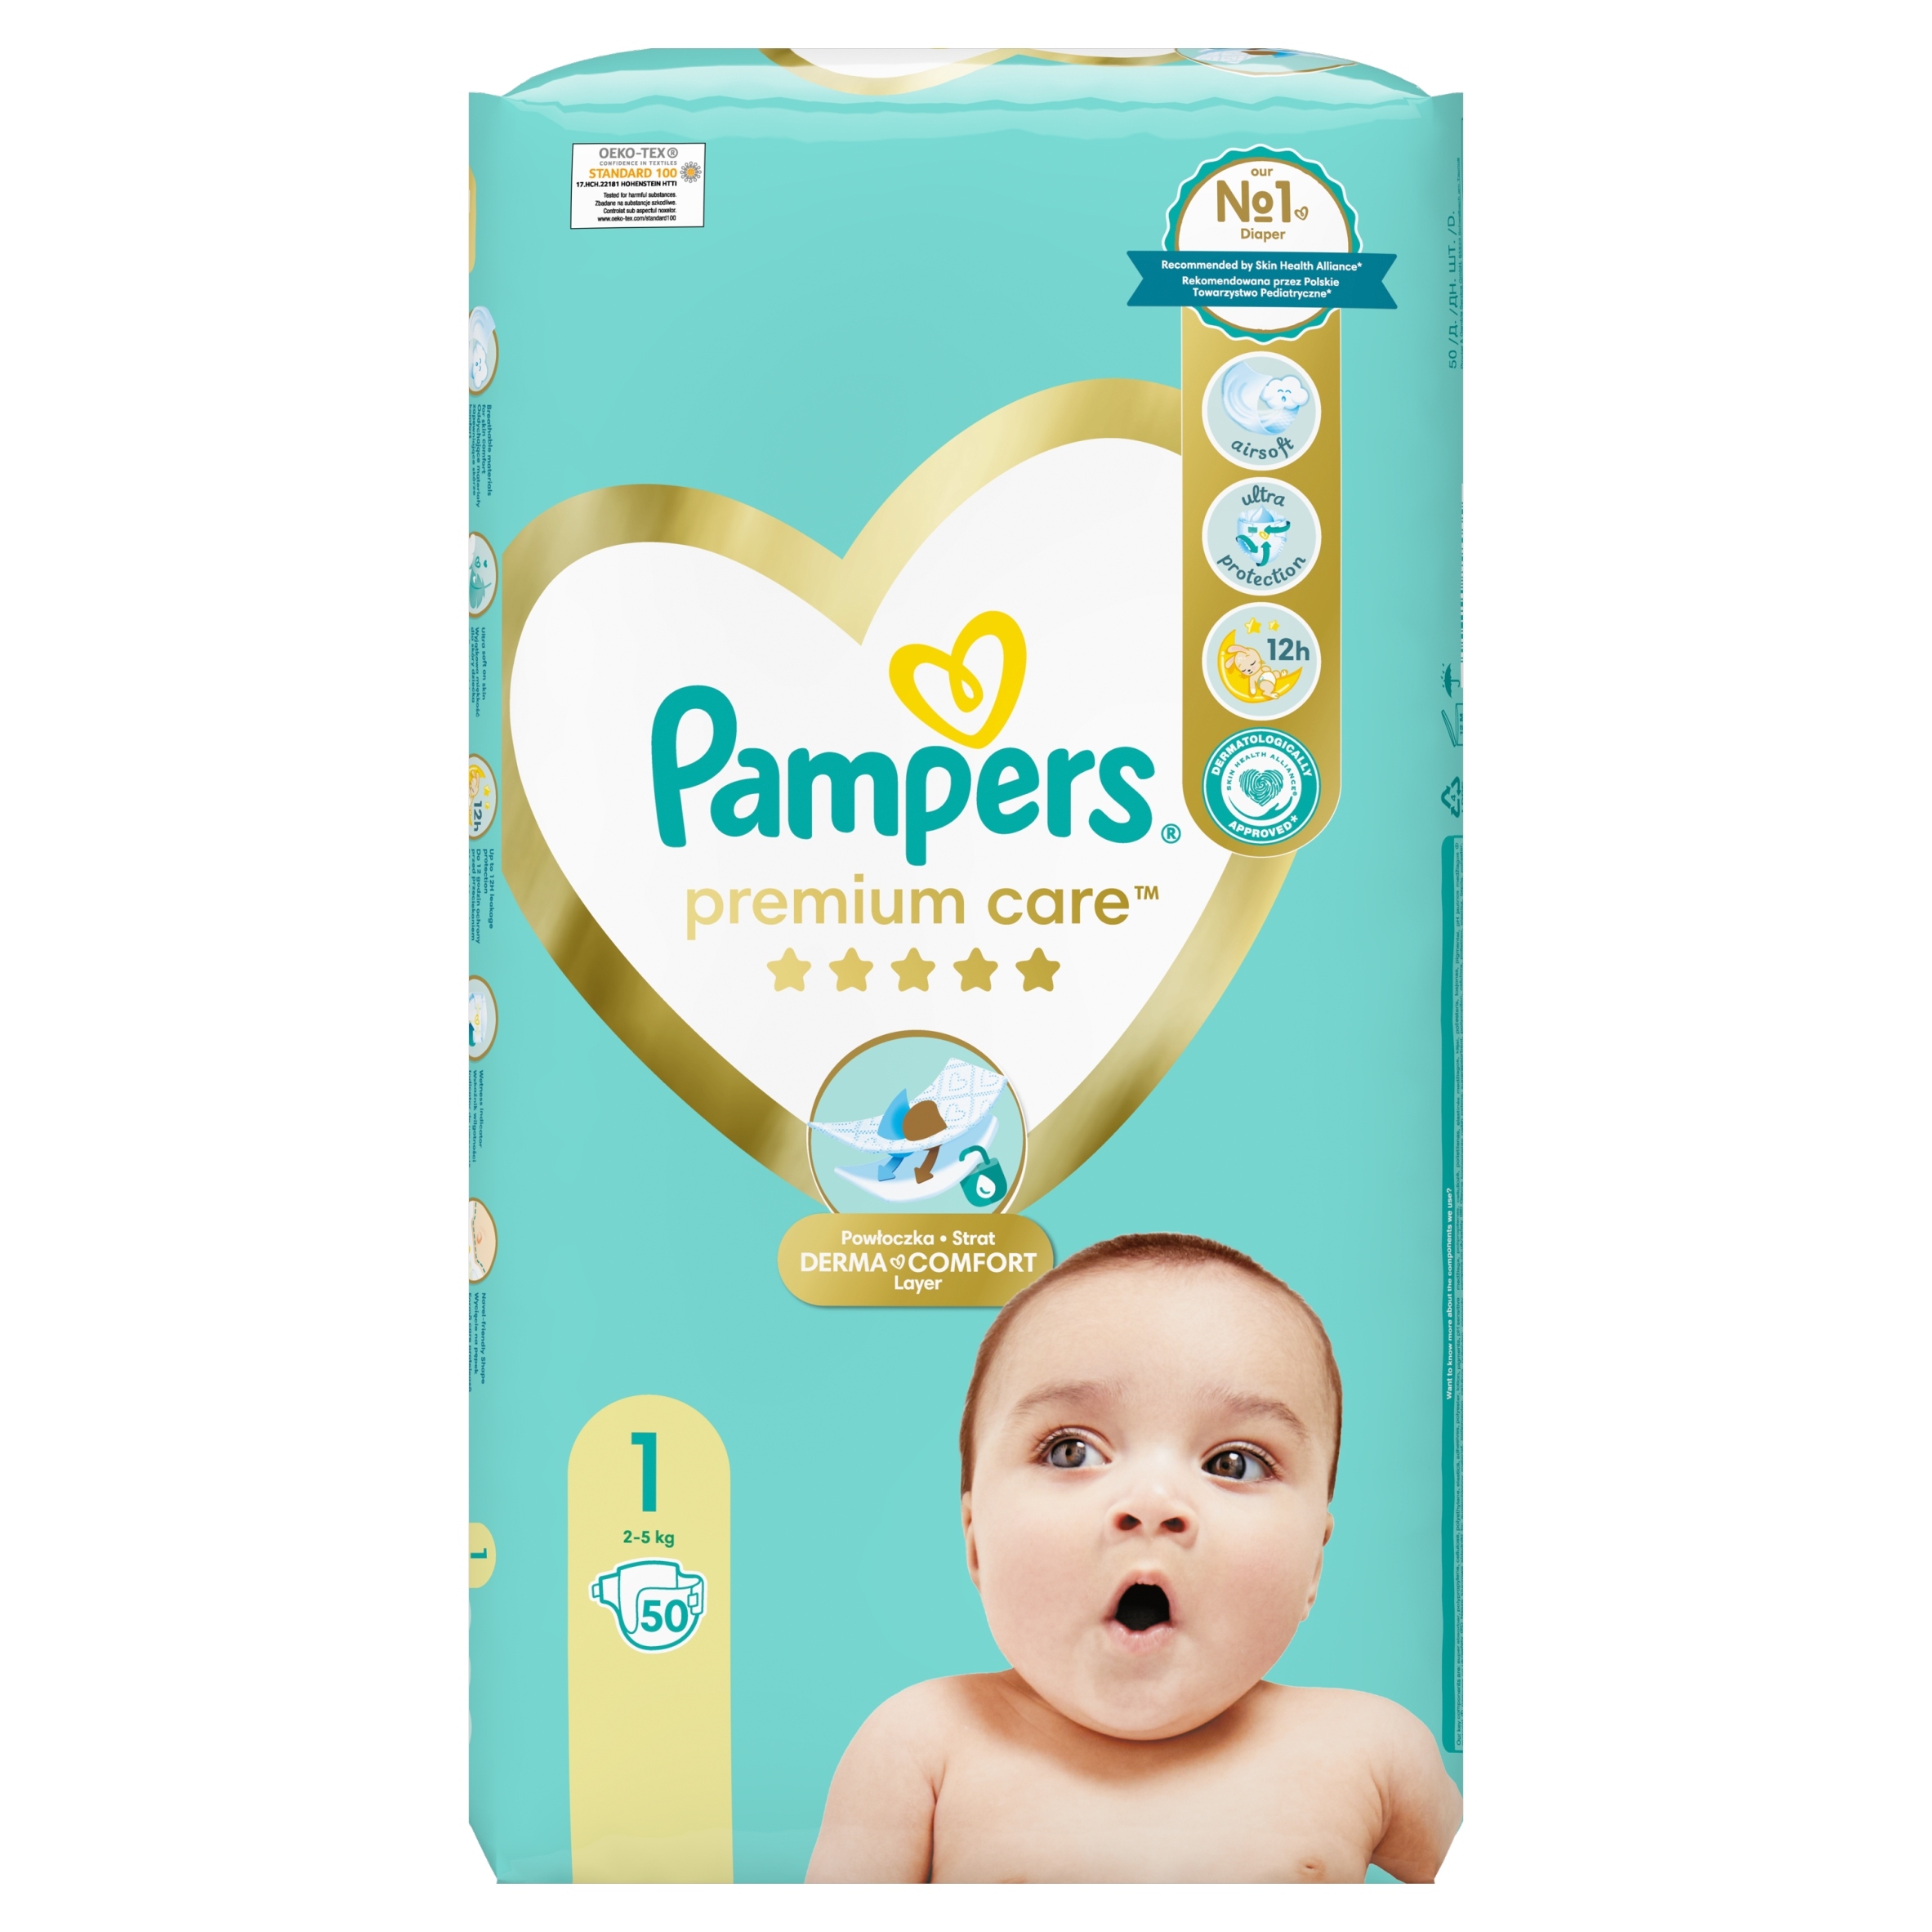 pampers marketing in japan